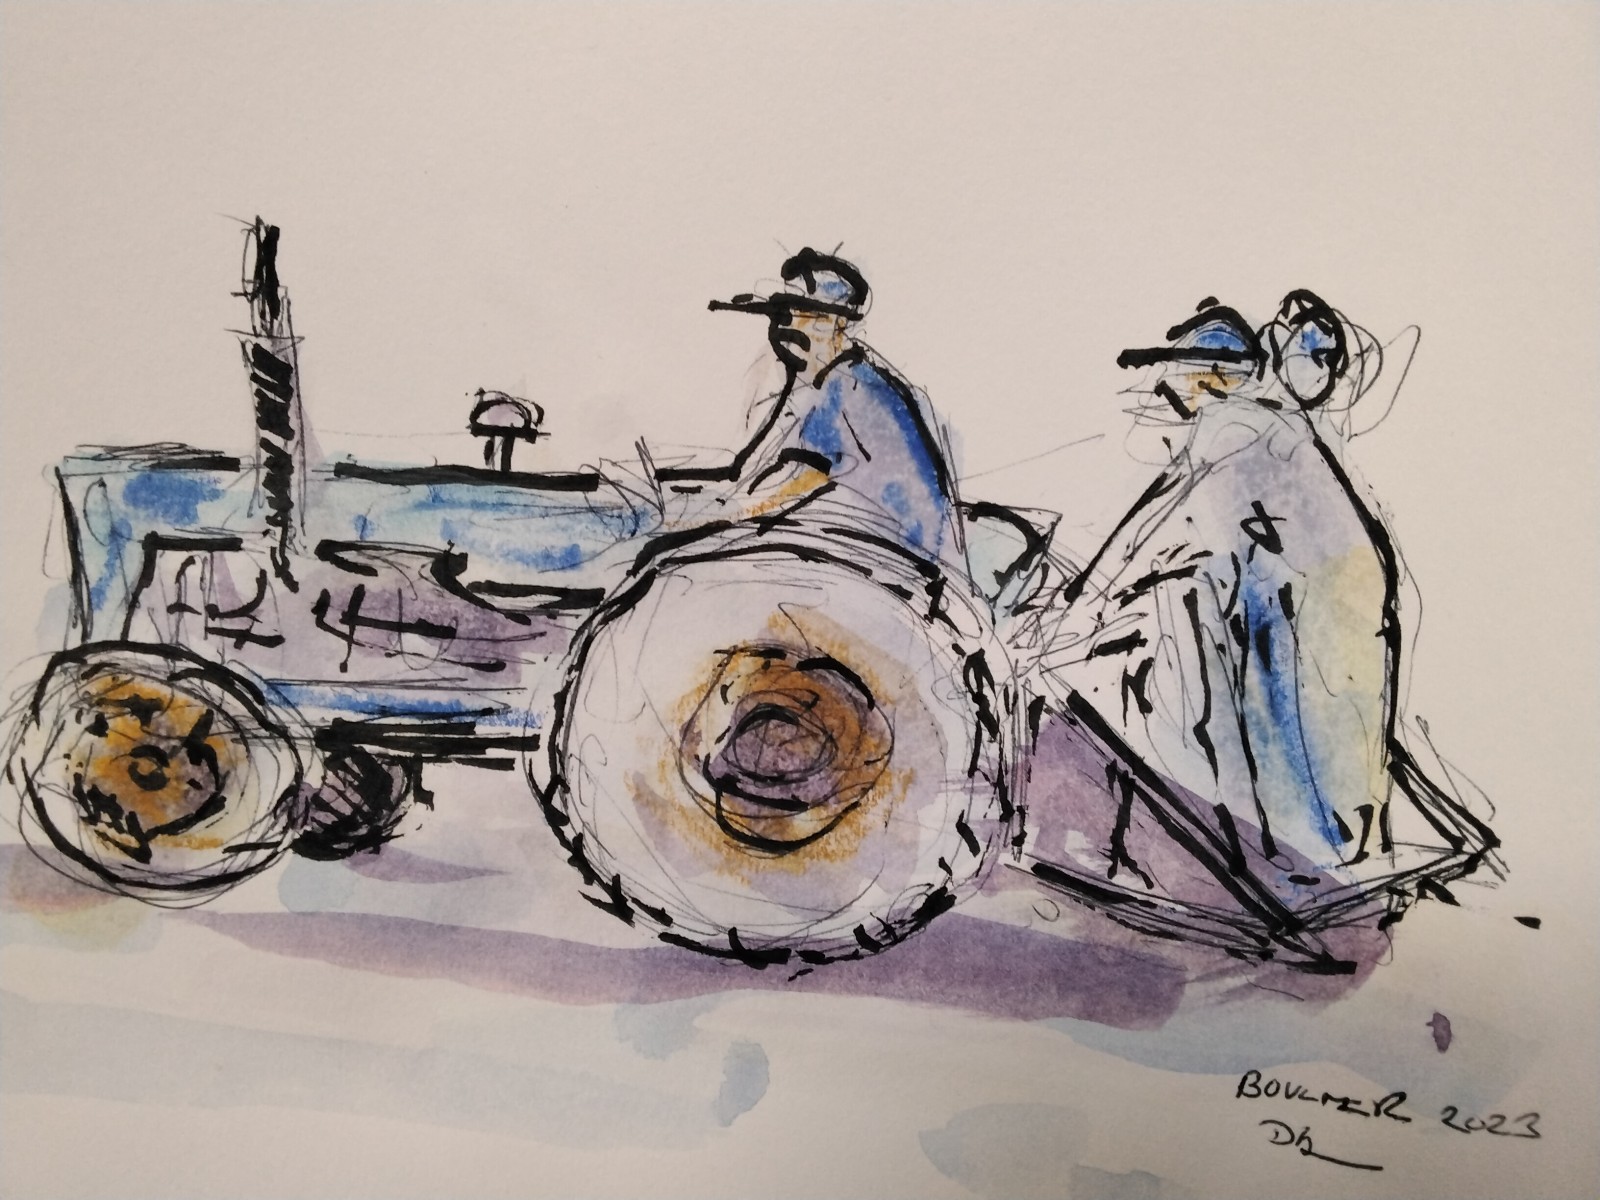 Boulmer tractor 2